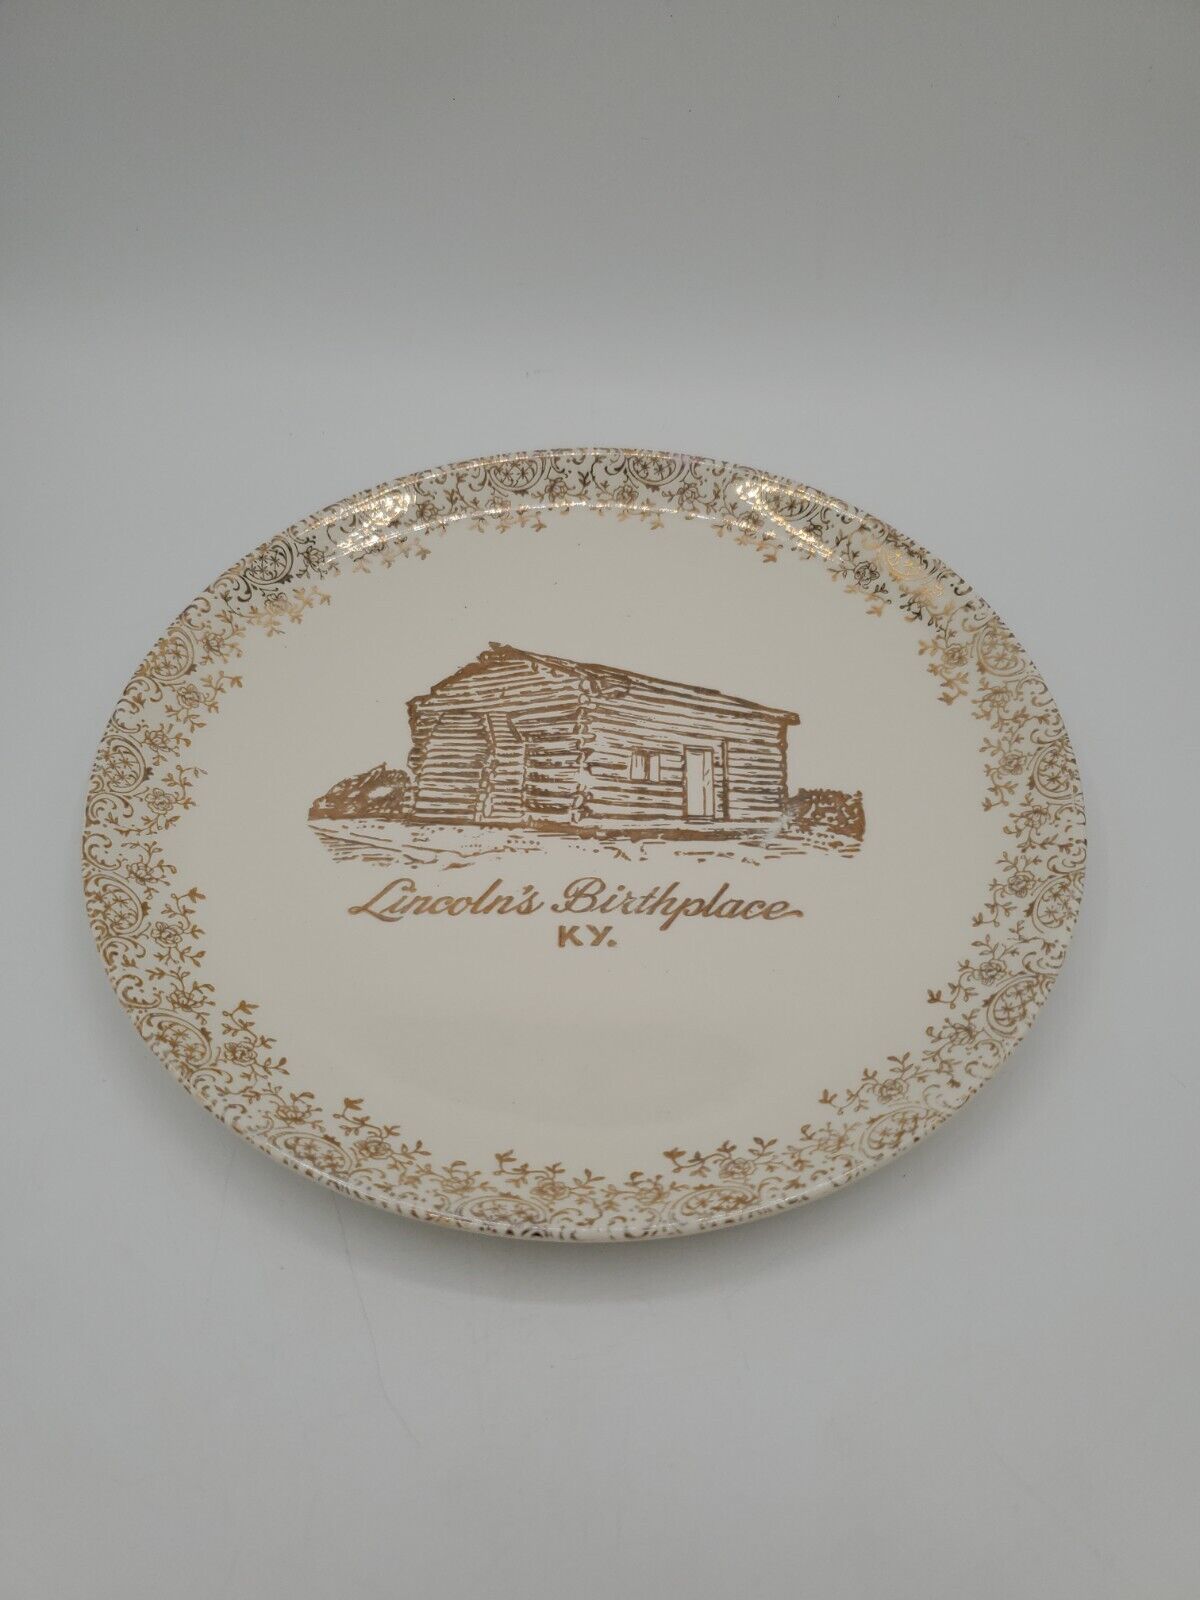 Vintage Lincoln's Birthplace Kentucky Collector Plate Gold Plate Trim 9.25